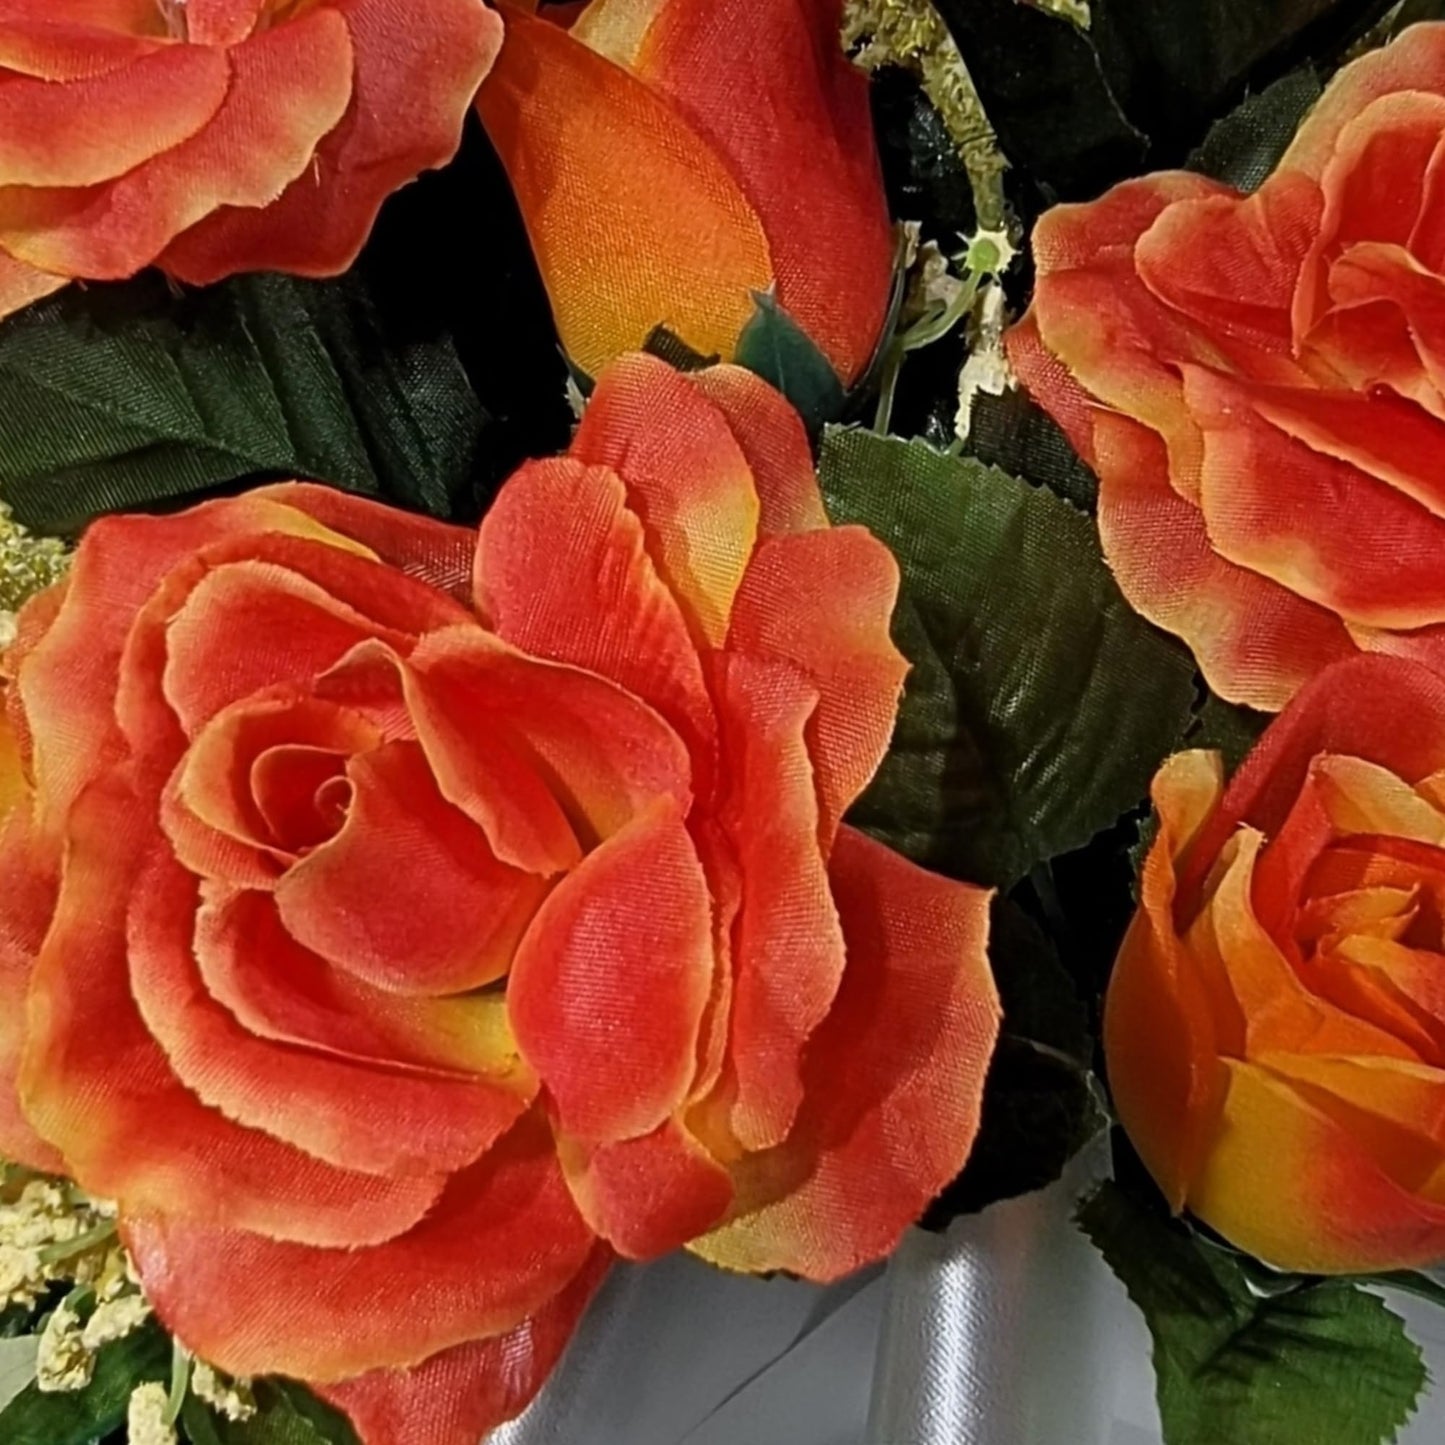 Realistic Artificial Cemetery Flowers - Silk Faux Floral Orange Rose and Calla Lily - Bouquet Pair for Grave - Headstone Saddle - 3 Memorial Decorations